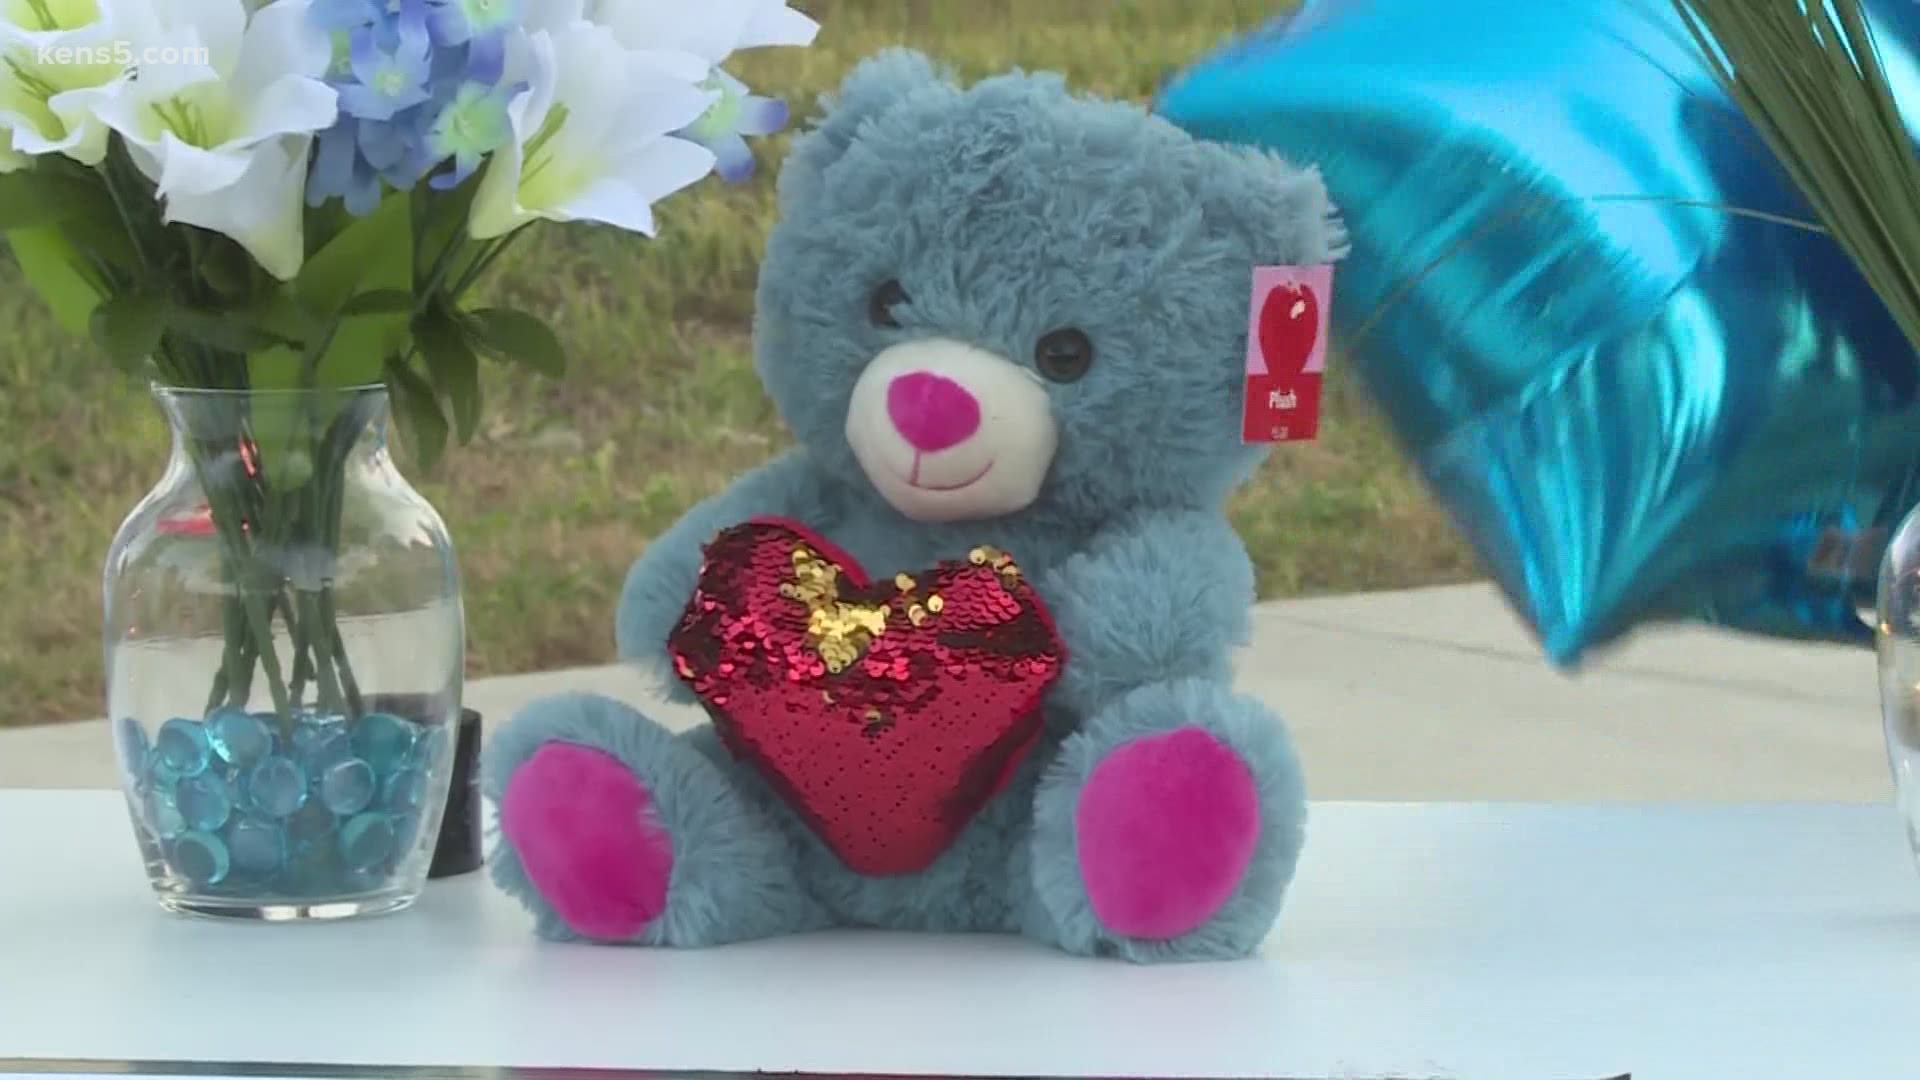 The search is on for baby James Avi Chairez. Wednesday night, the community held a vigil for the 19-month old days after his mother's arrest.